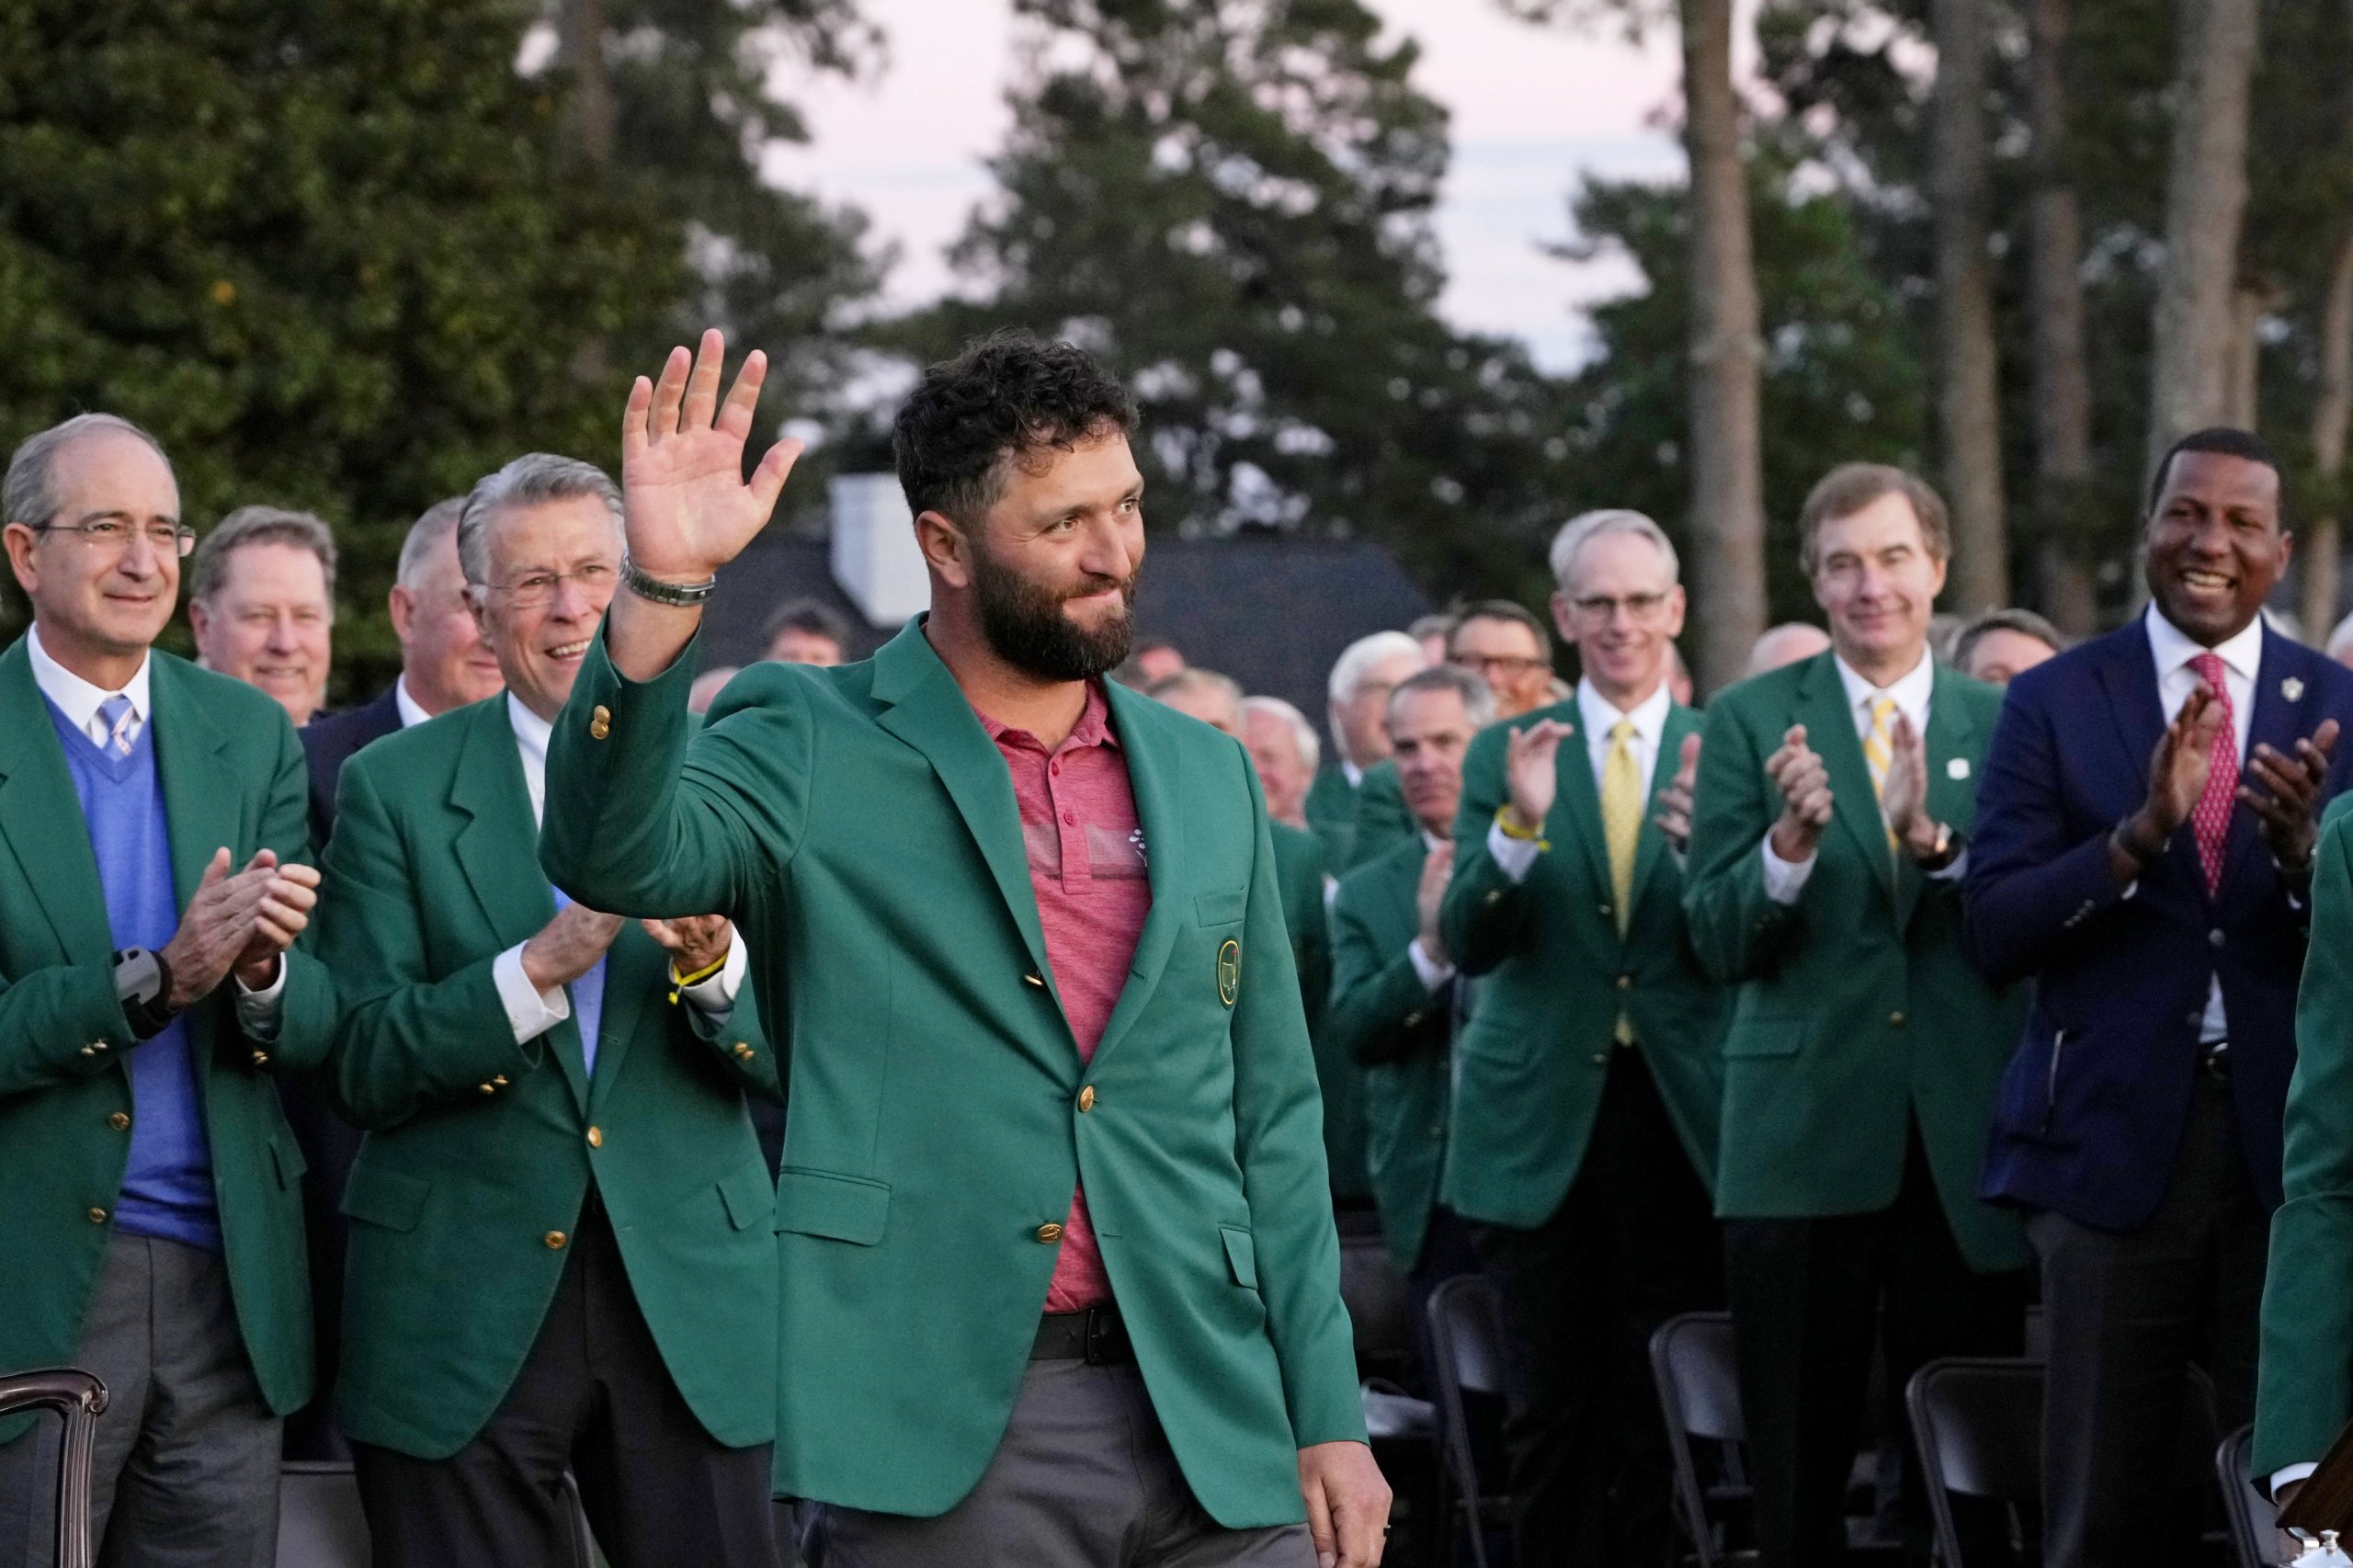 Jon Rahm in his green jacket after winning this 2023 Masters.